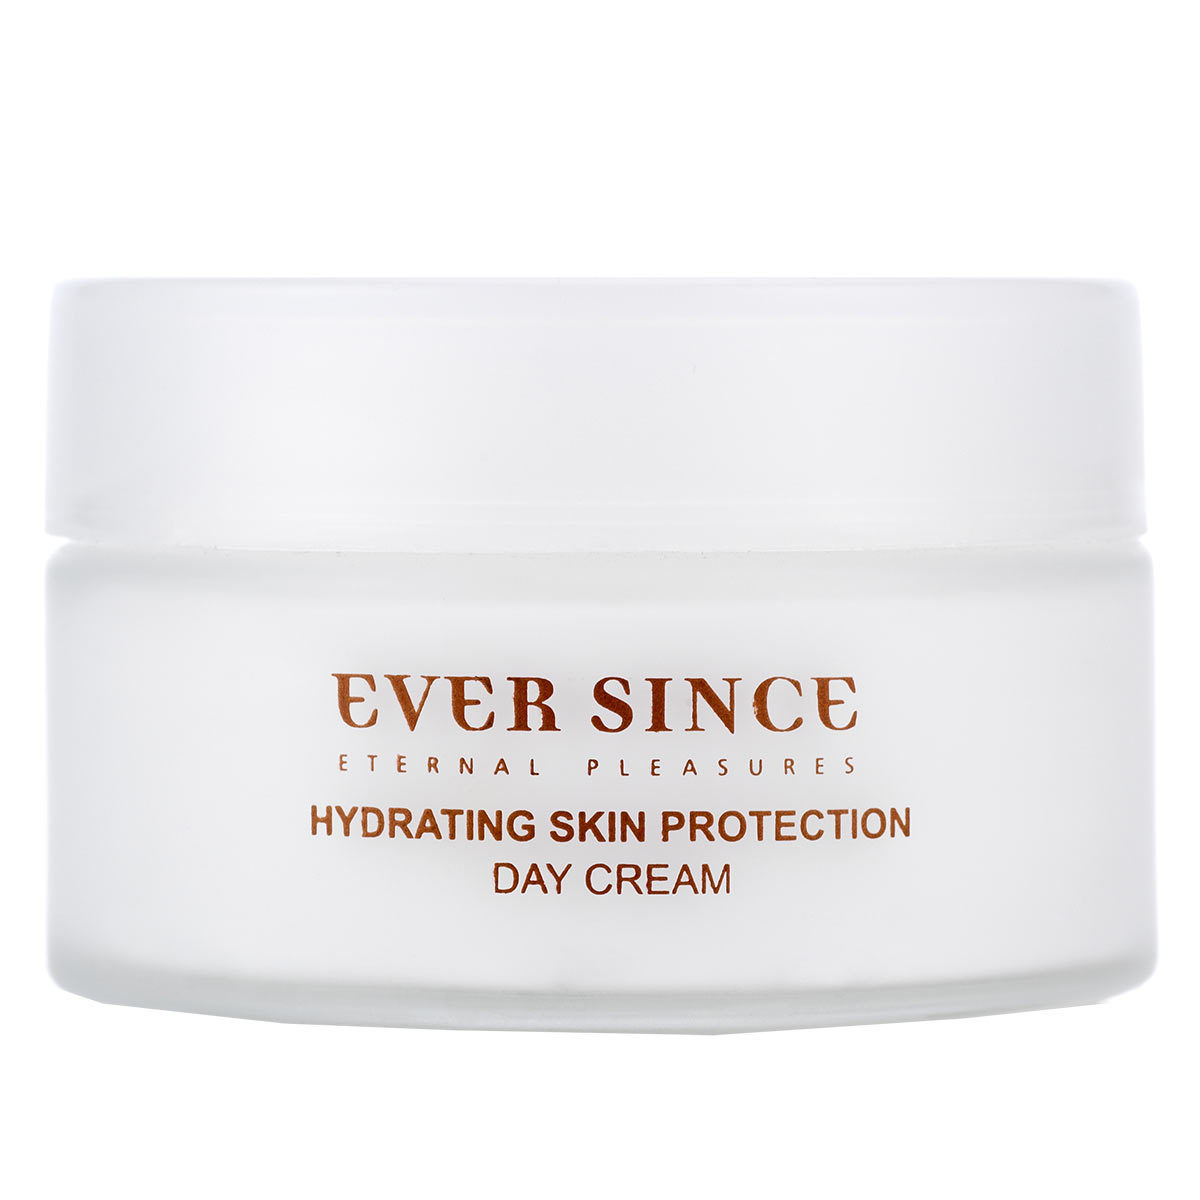 Ever Since Hydrating Skin Protection Day Cream, 50ml